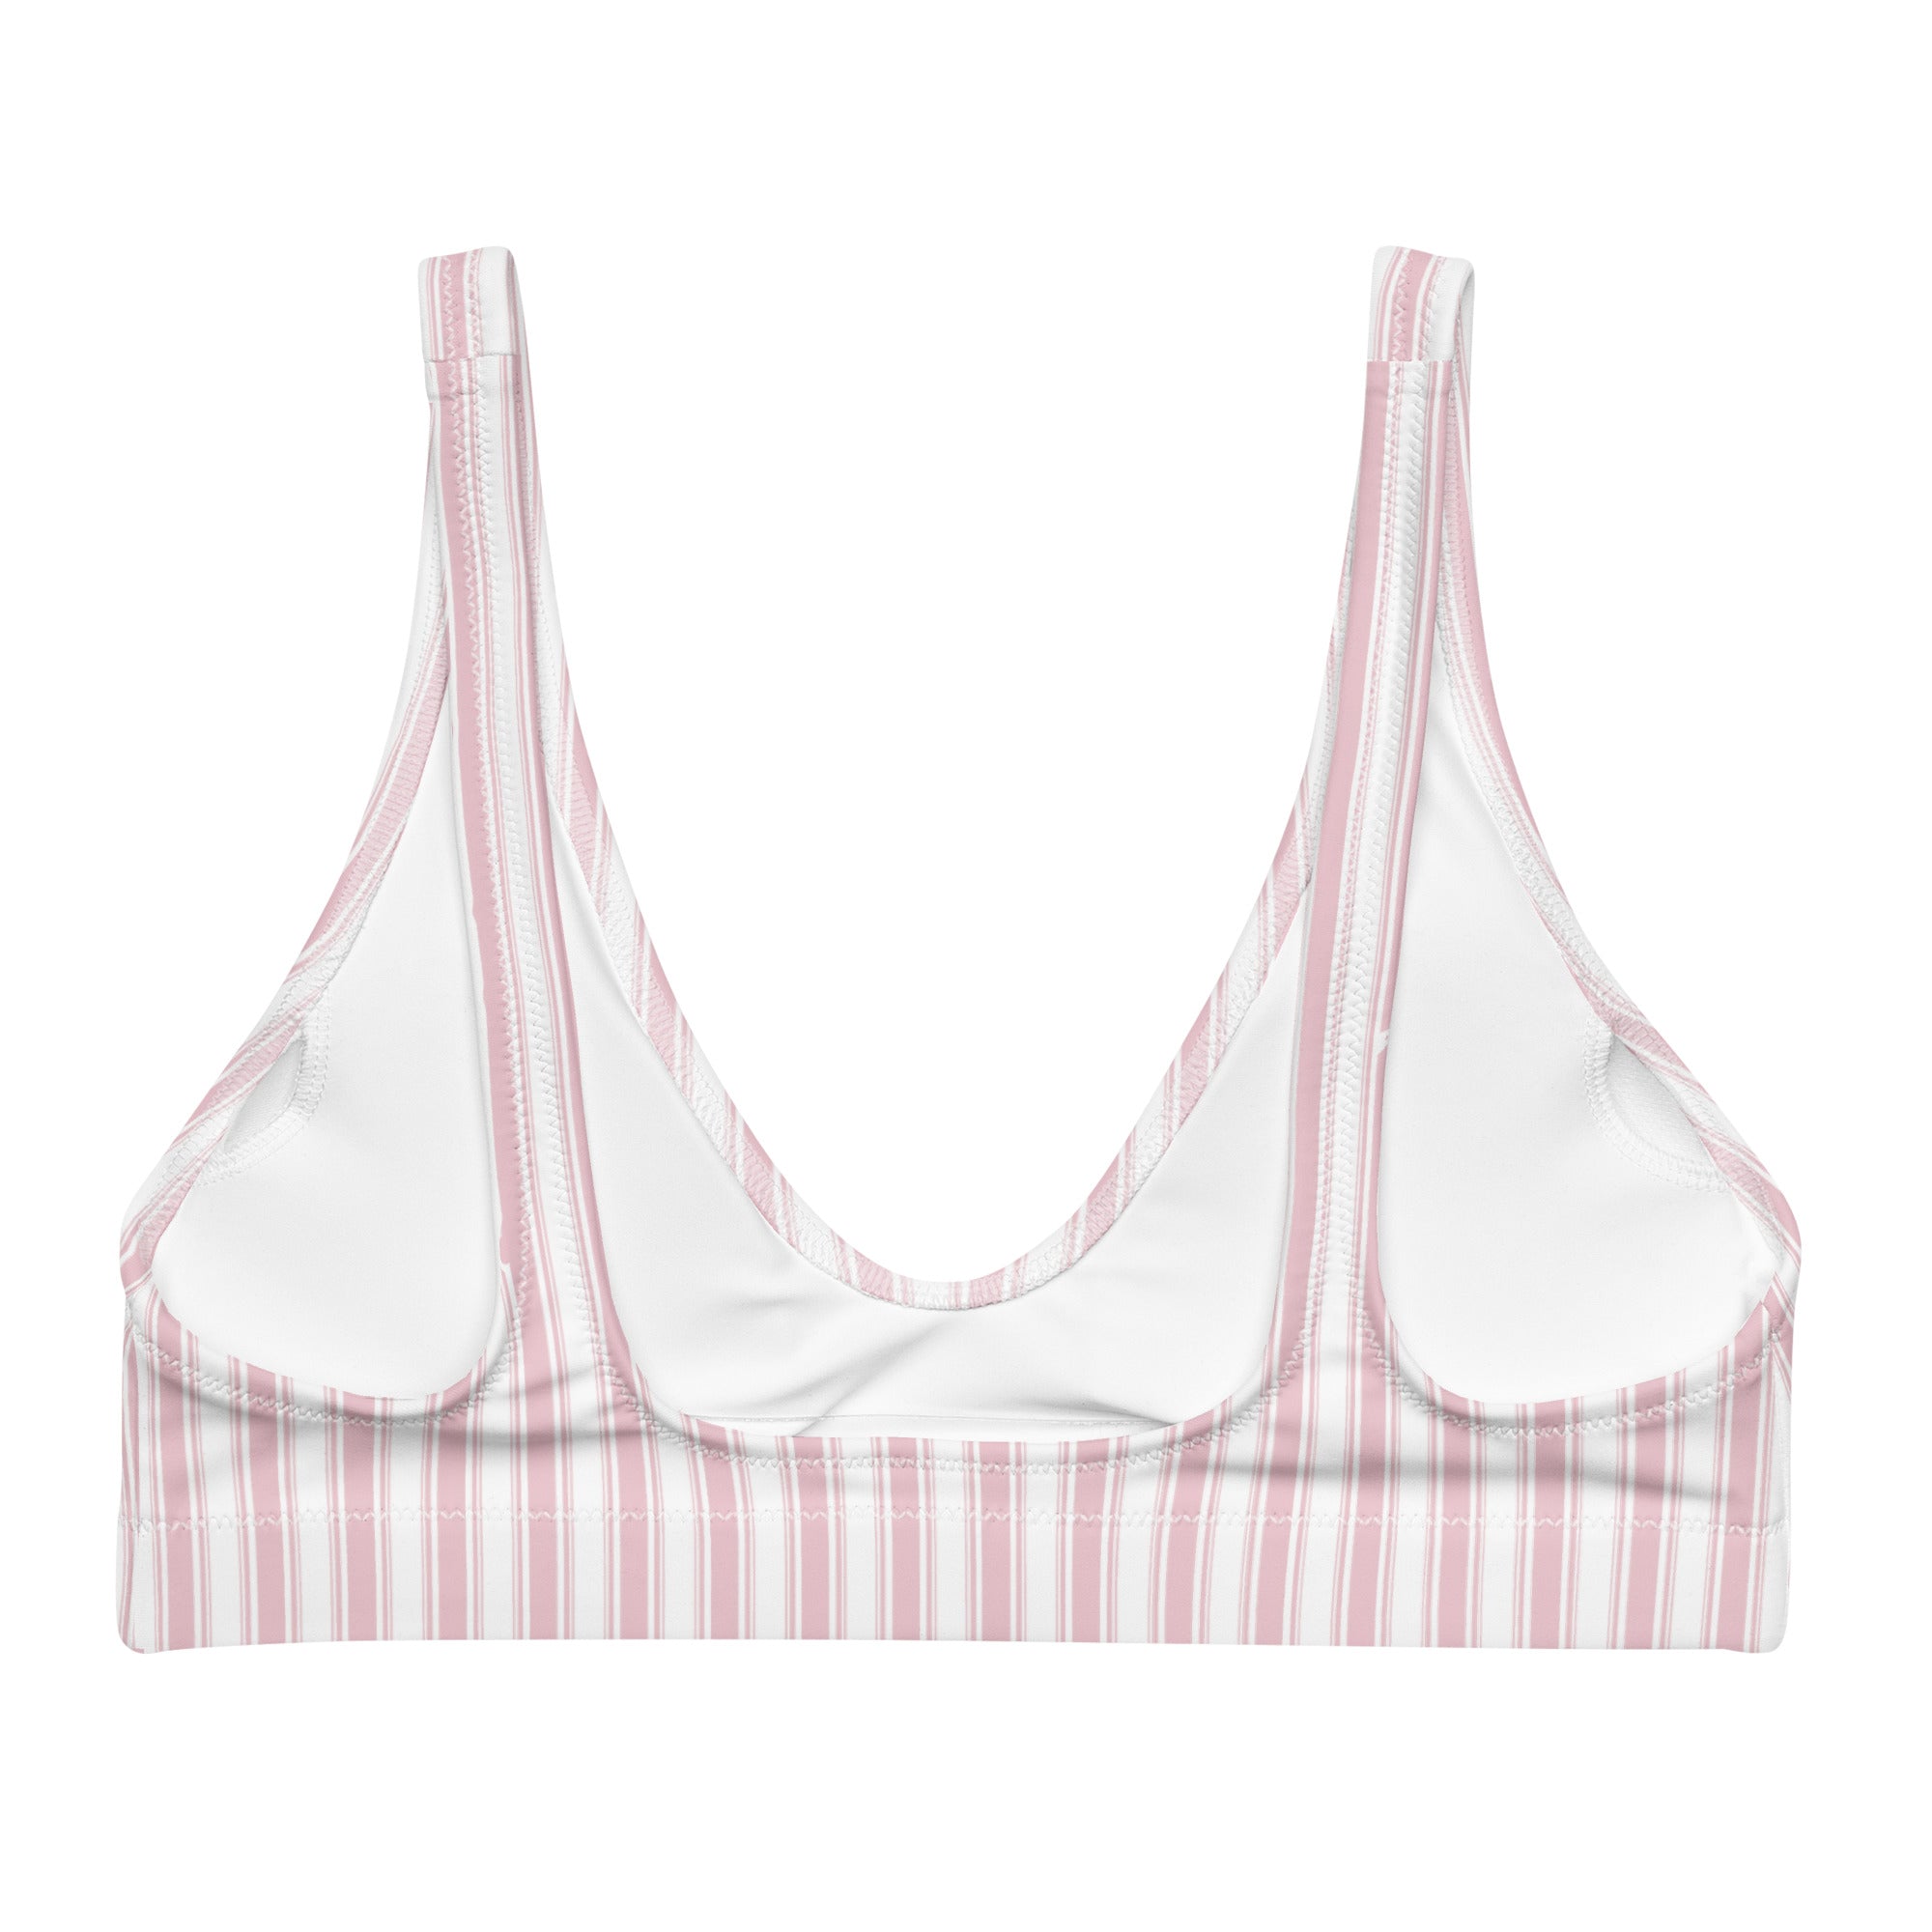 Crafted from high-quality, durable materials, this bikini top features vertical stripes that elongate the torso and create a flattering silhouette. 